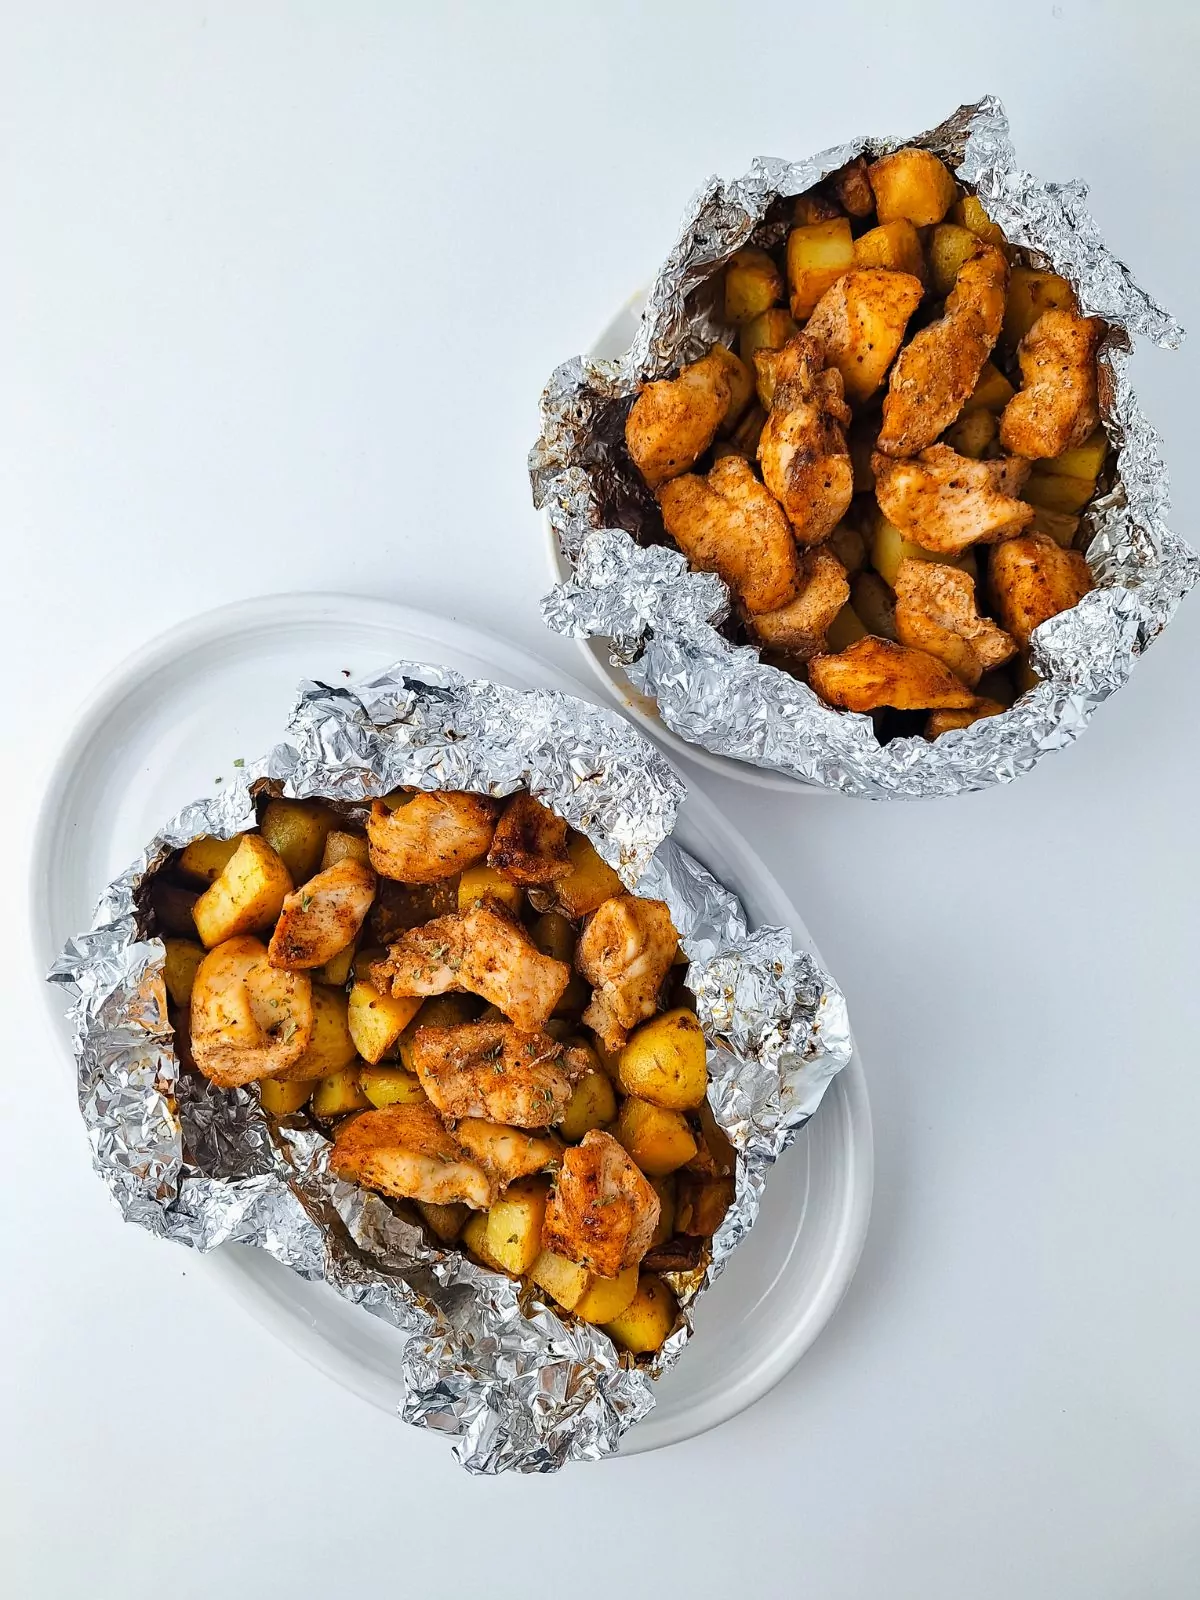 cooked chicken, potatoes bundles in aluminum foil on plate.